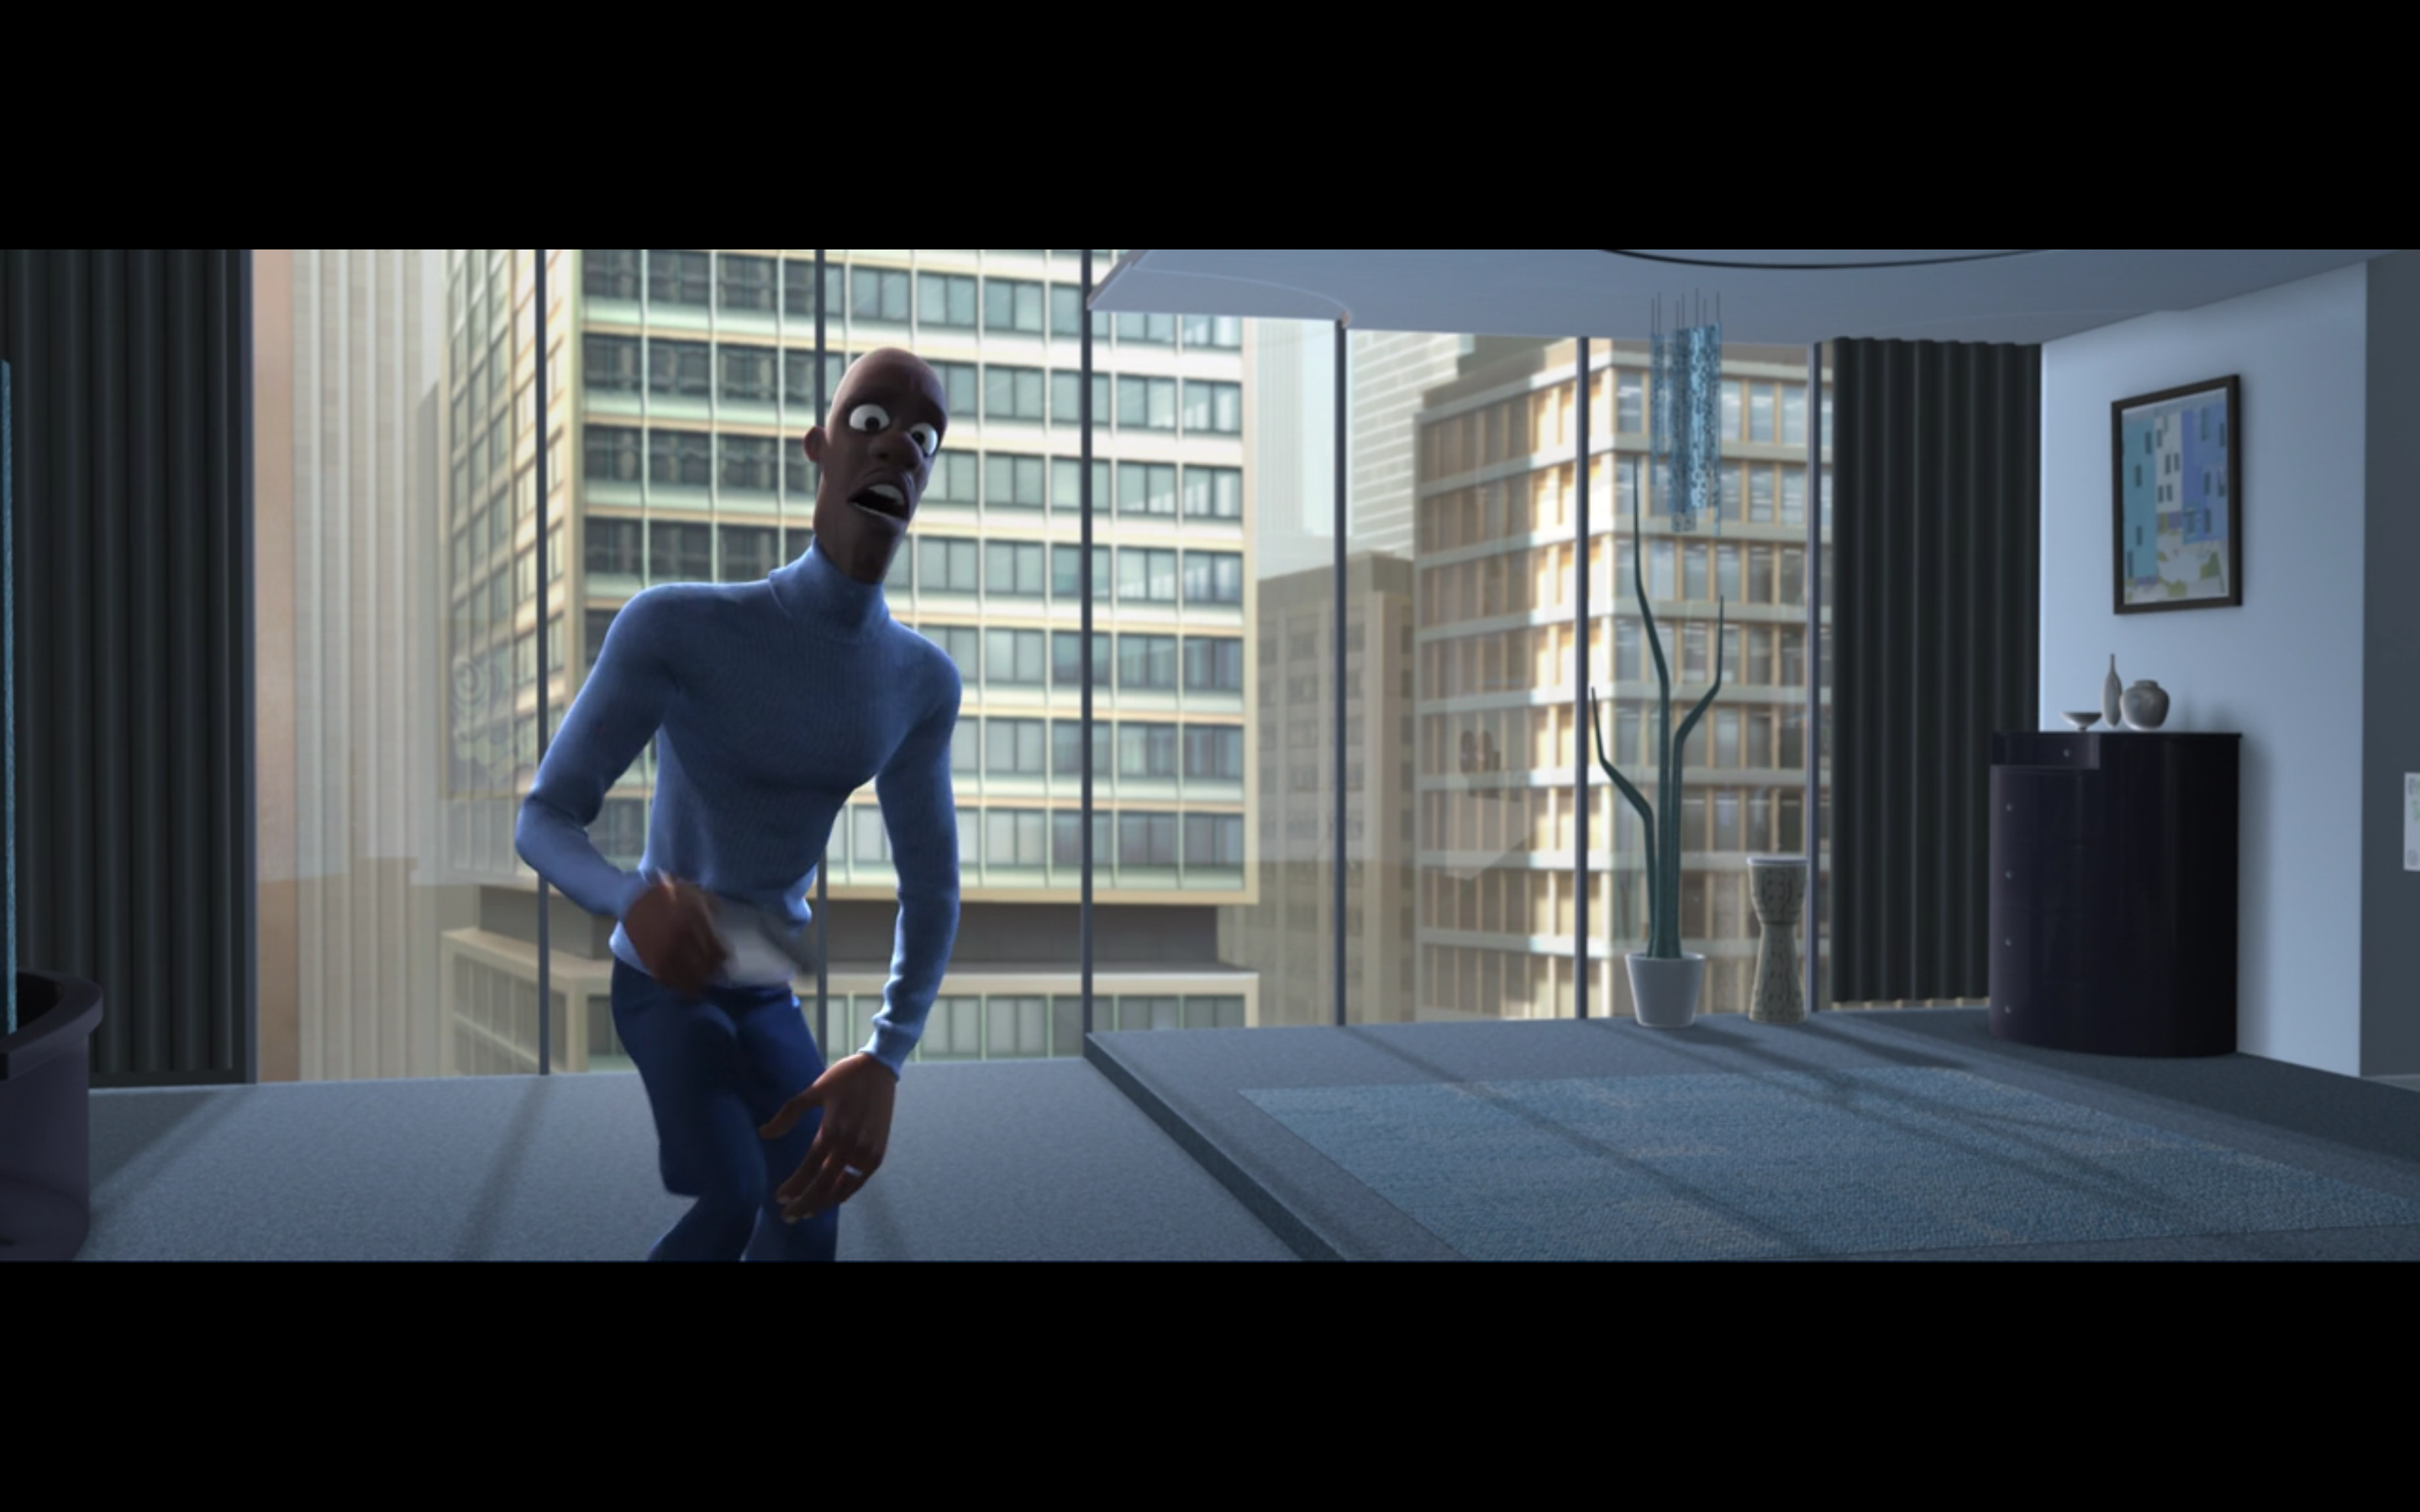 Where are run from. Where is my super Suit. Where's my super Suit. Суперсемейка Люциус Бест. Люциус Супергерой.